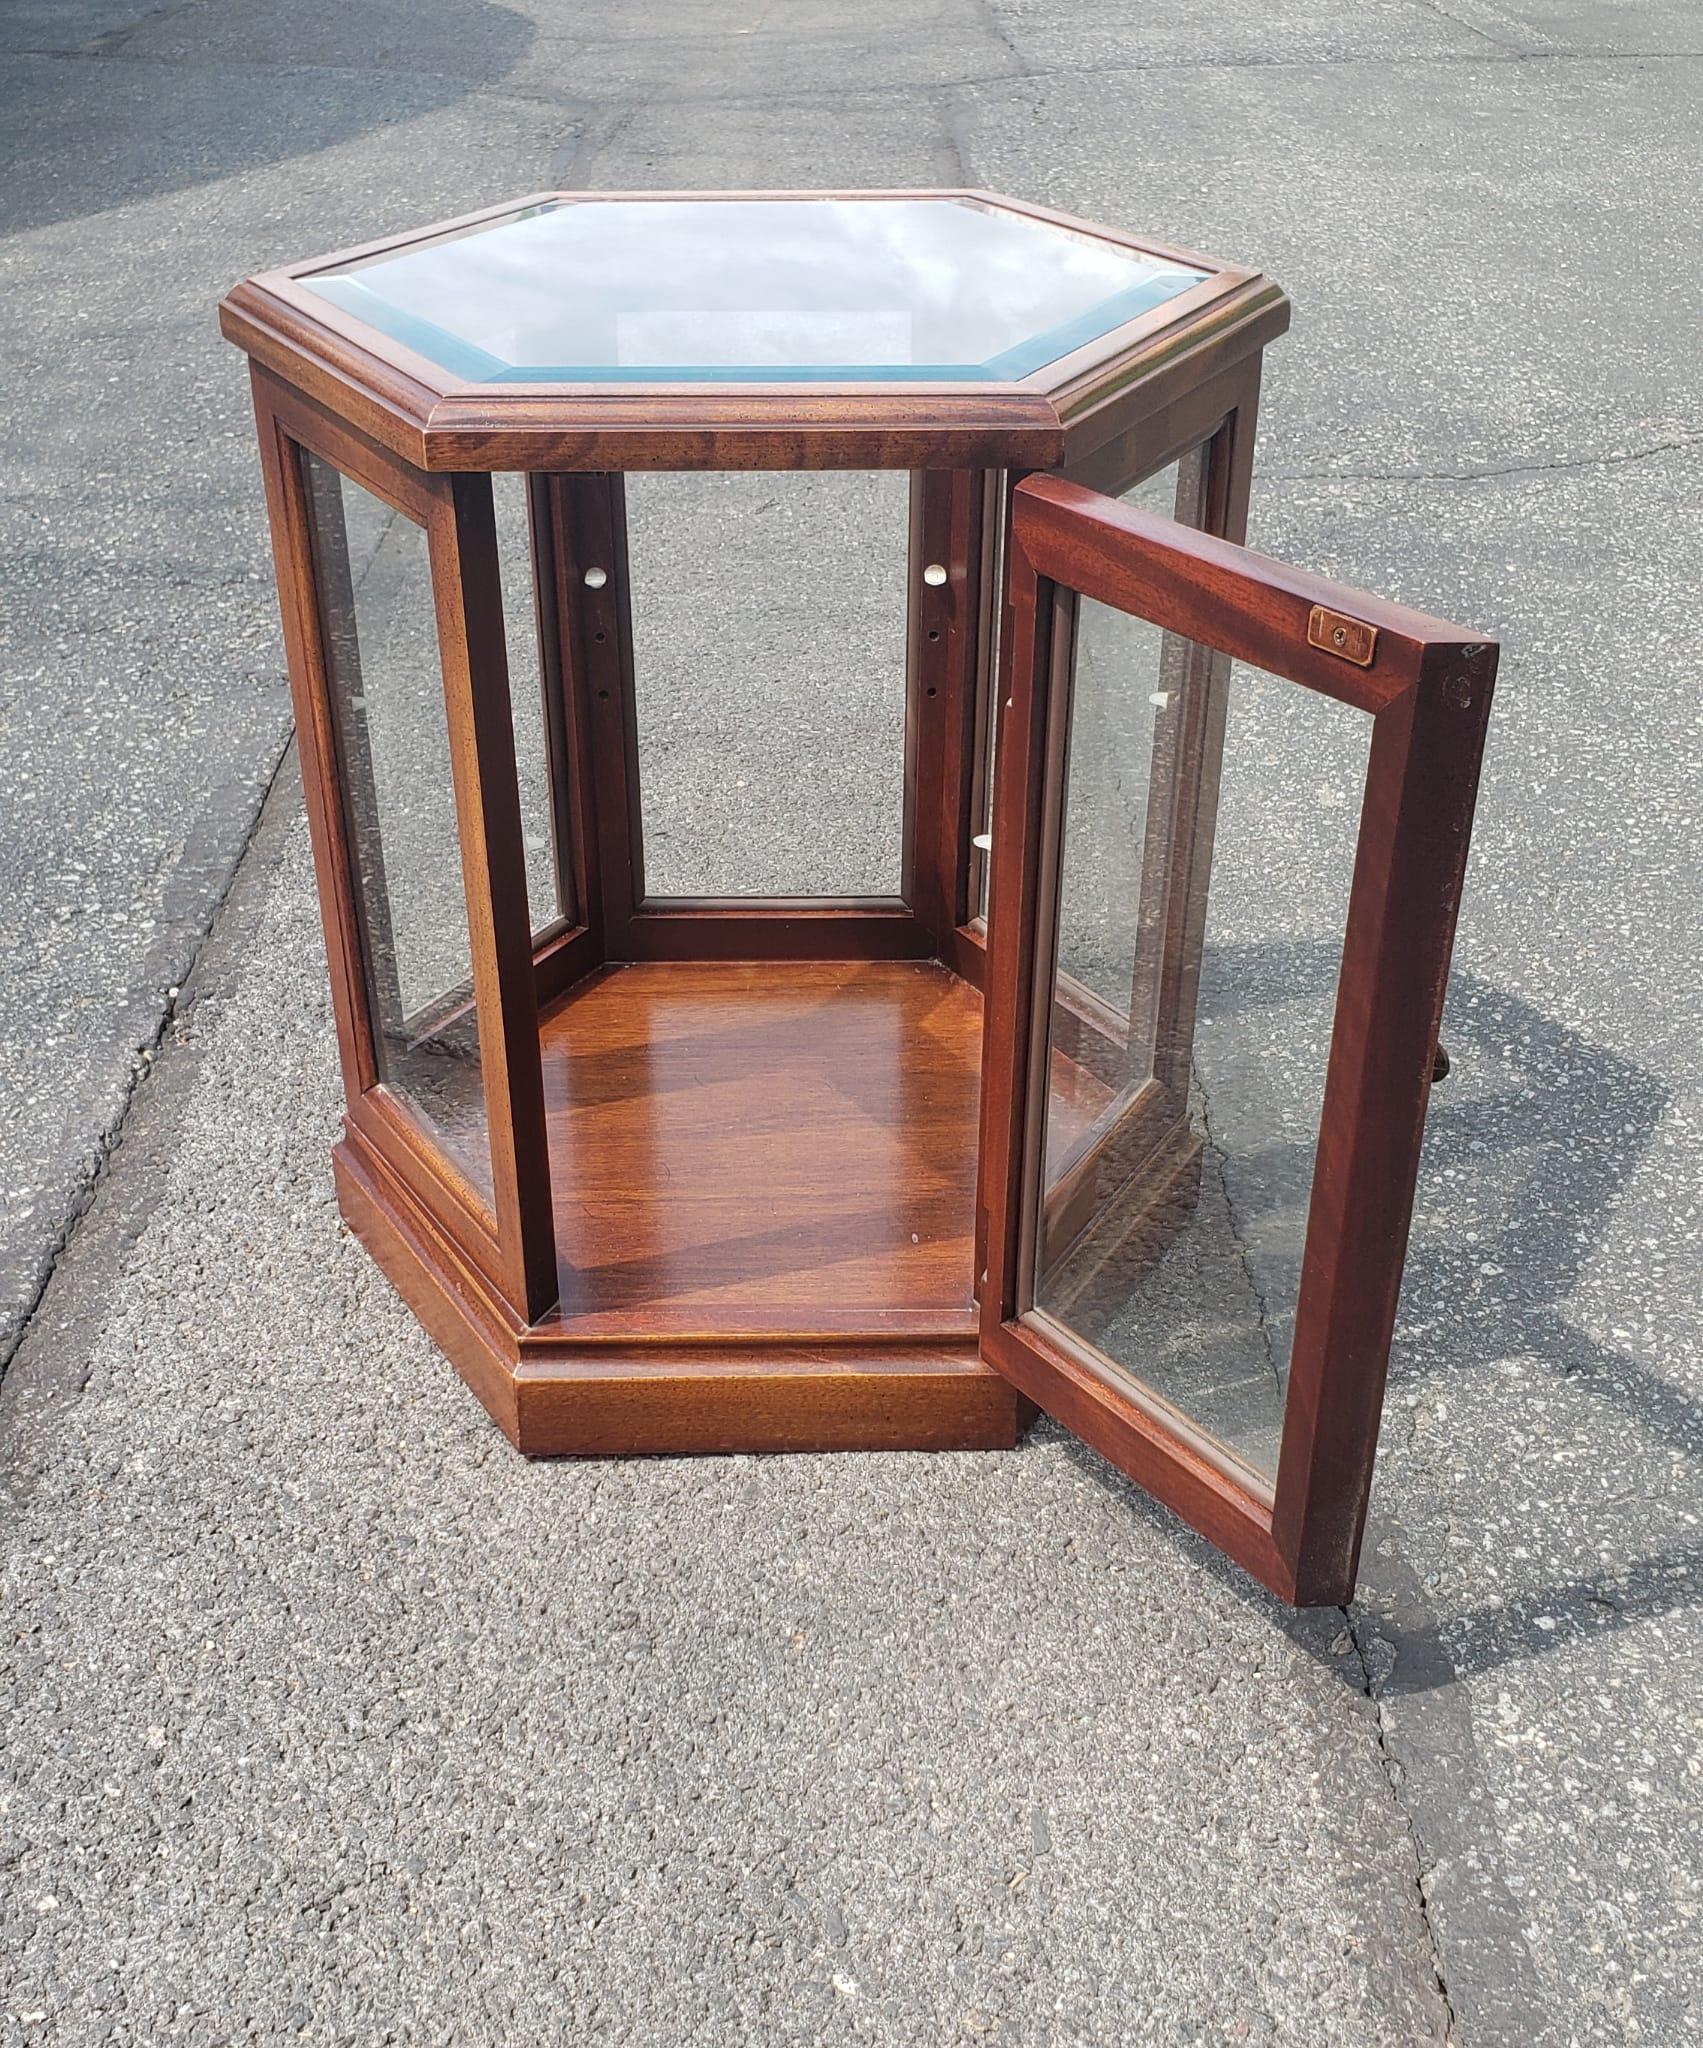 Vintage Fruitwood and Glass Paneled Hexagonal Side Table In Good Condition For Sale In Germantown, MD